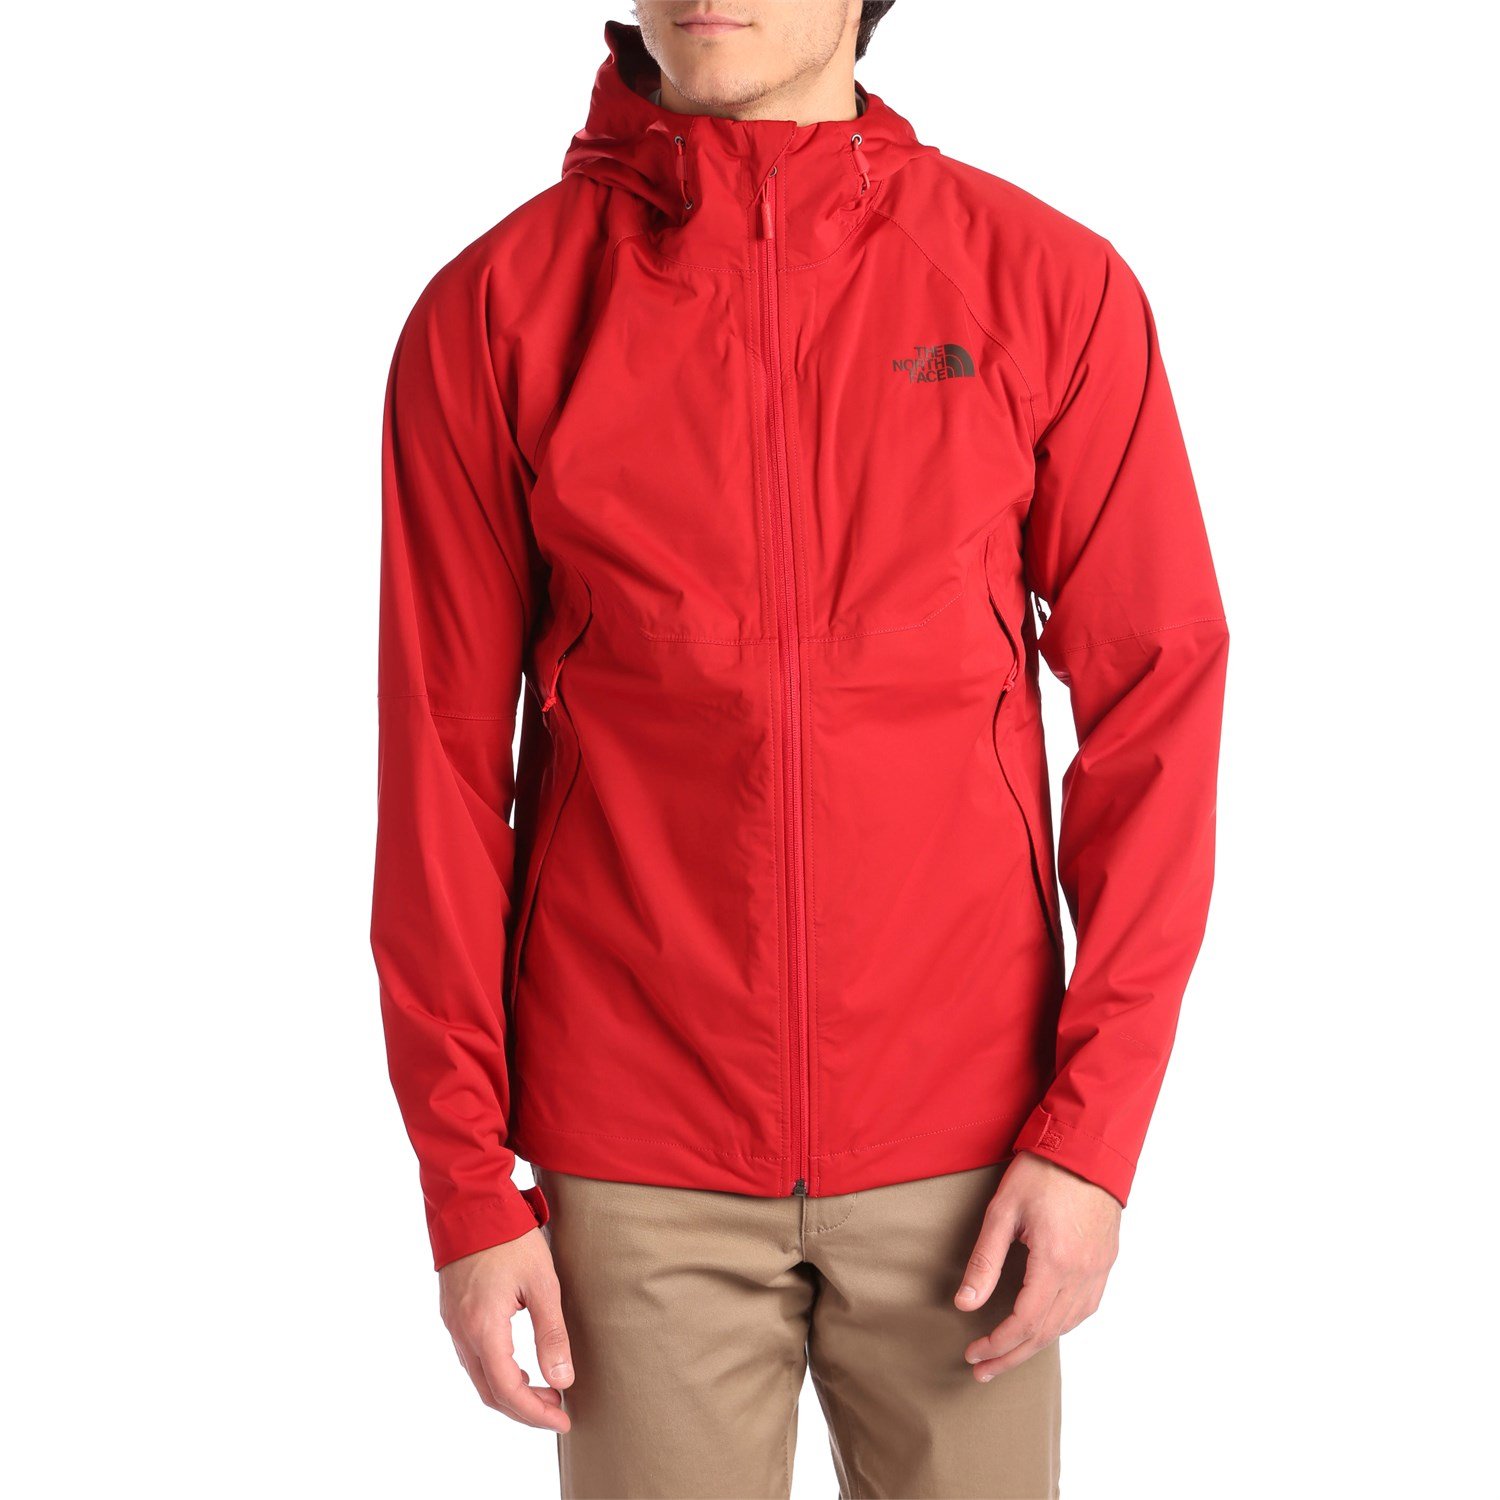 men's allproof stretch jacket review